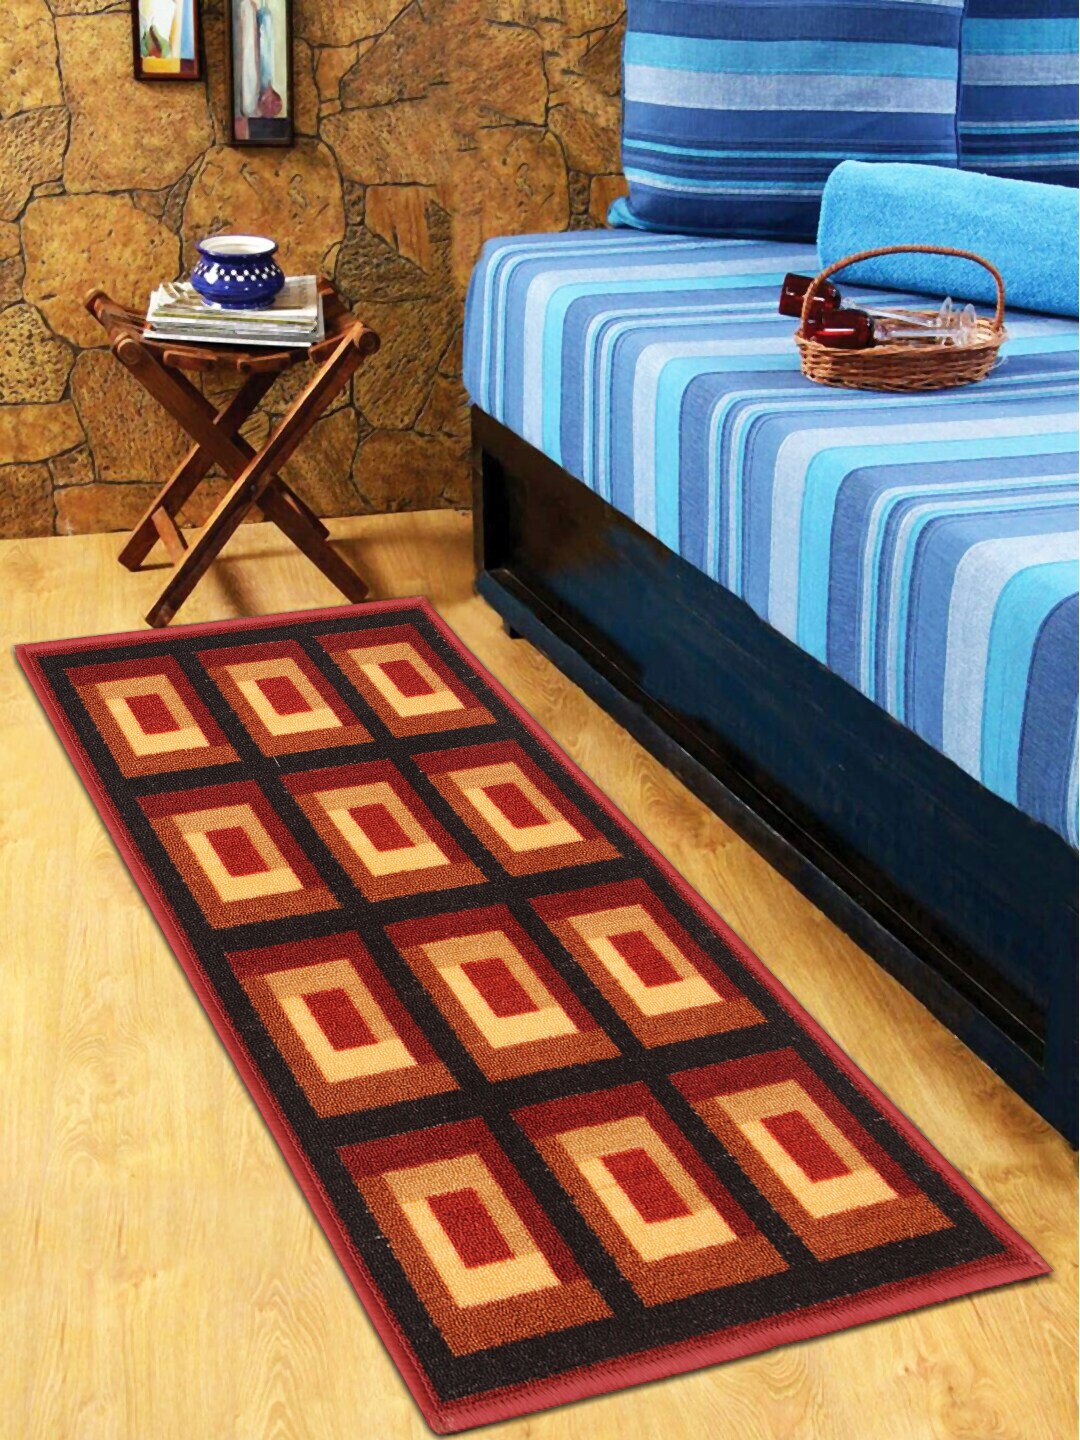 Kuber Industries Multicolored Checked Design Bed Runner Mat Price in India